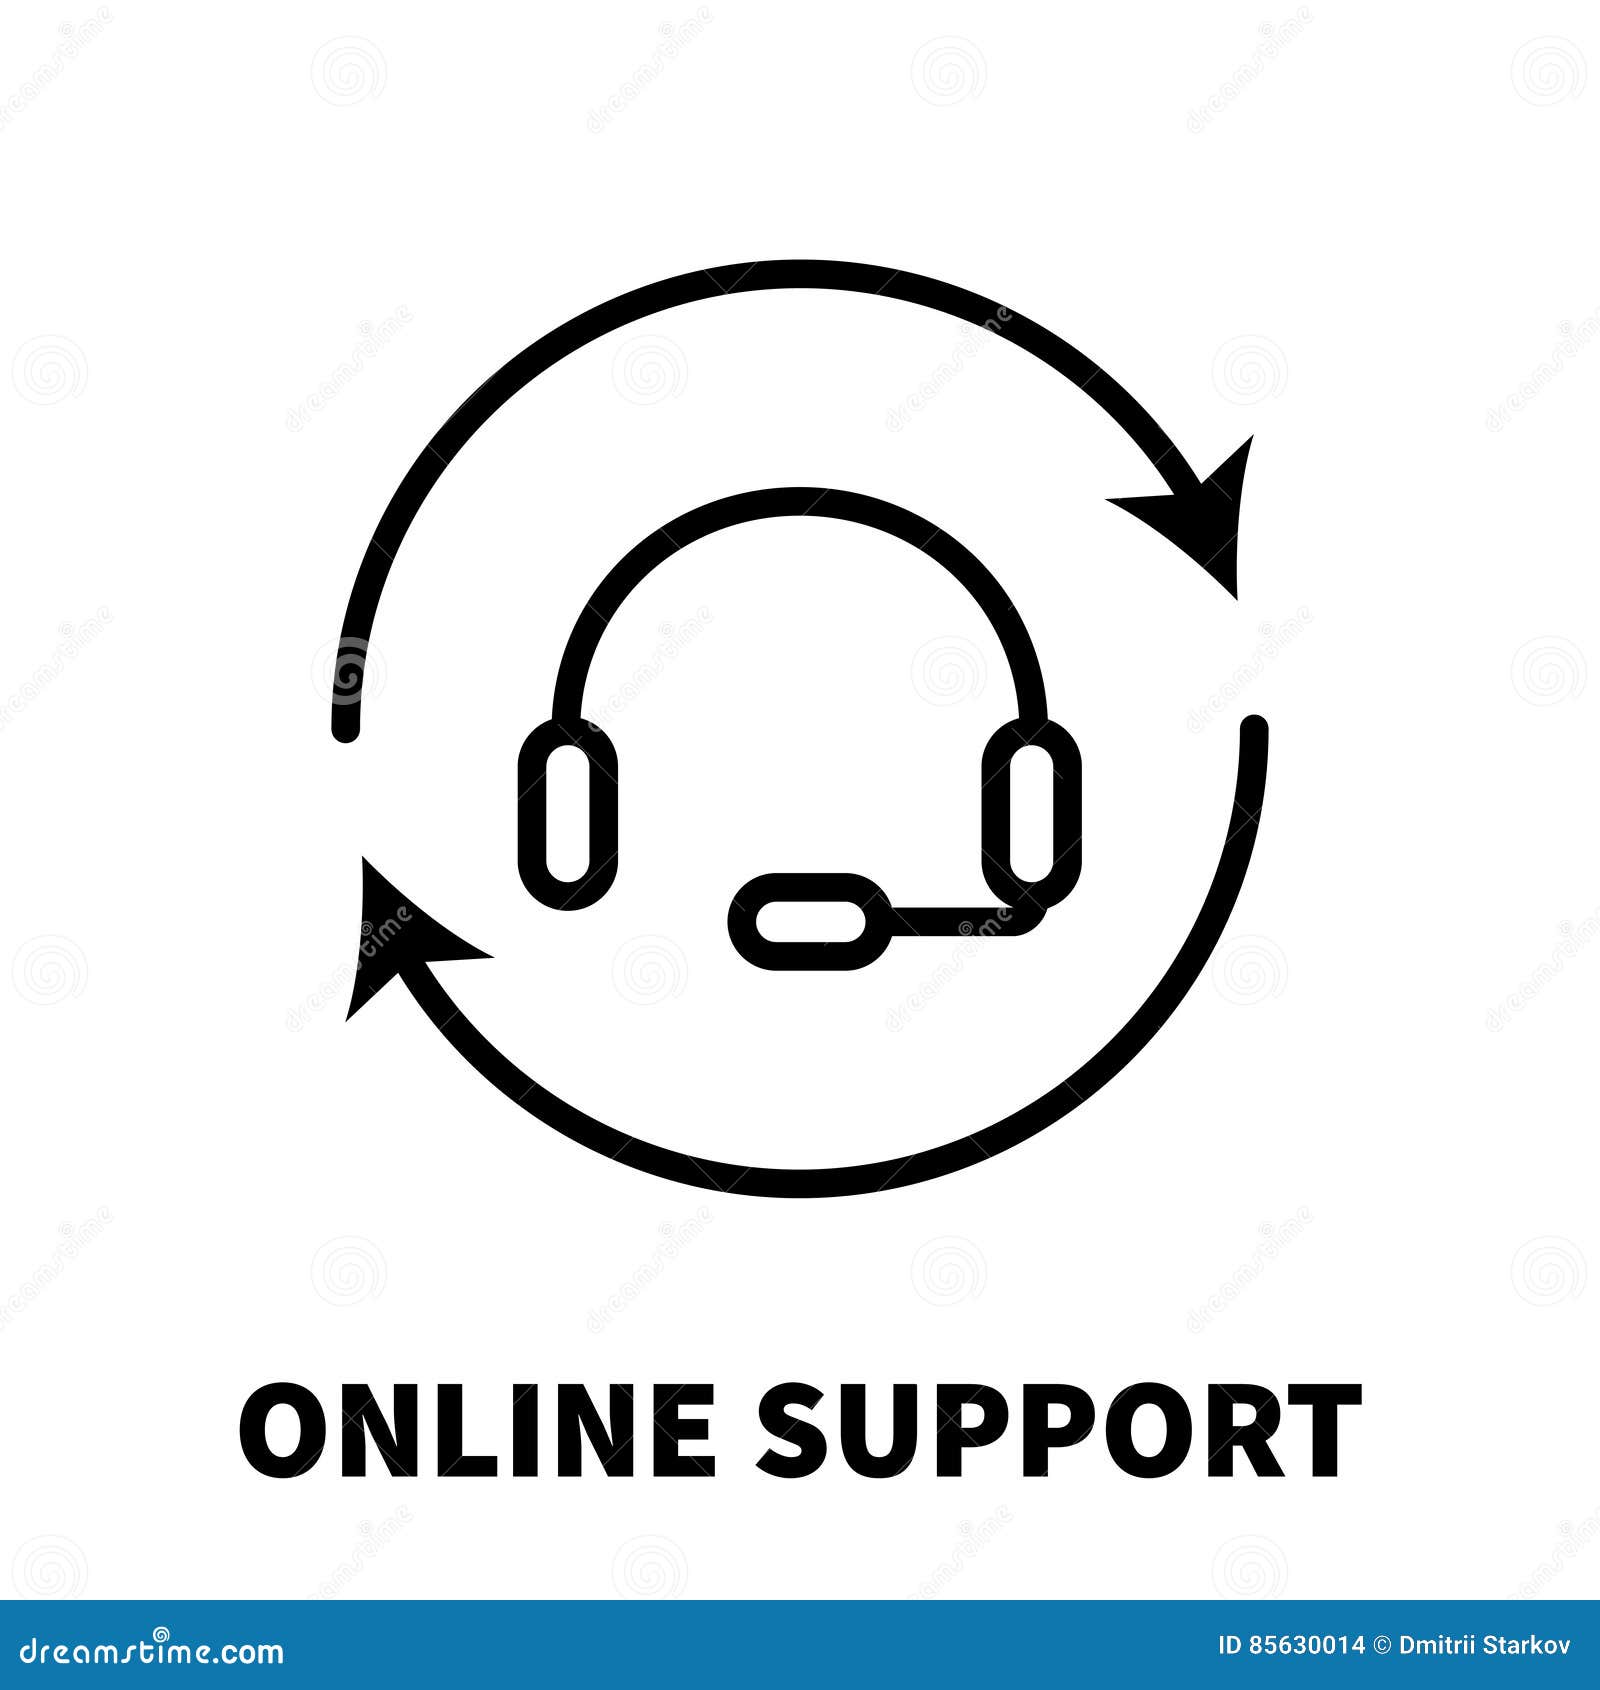 First line support